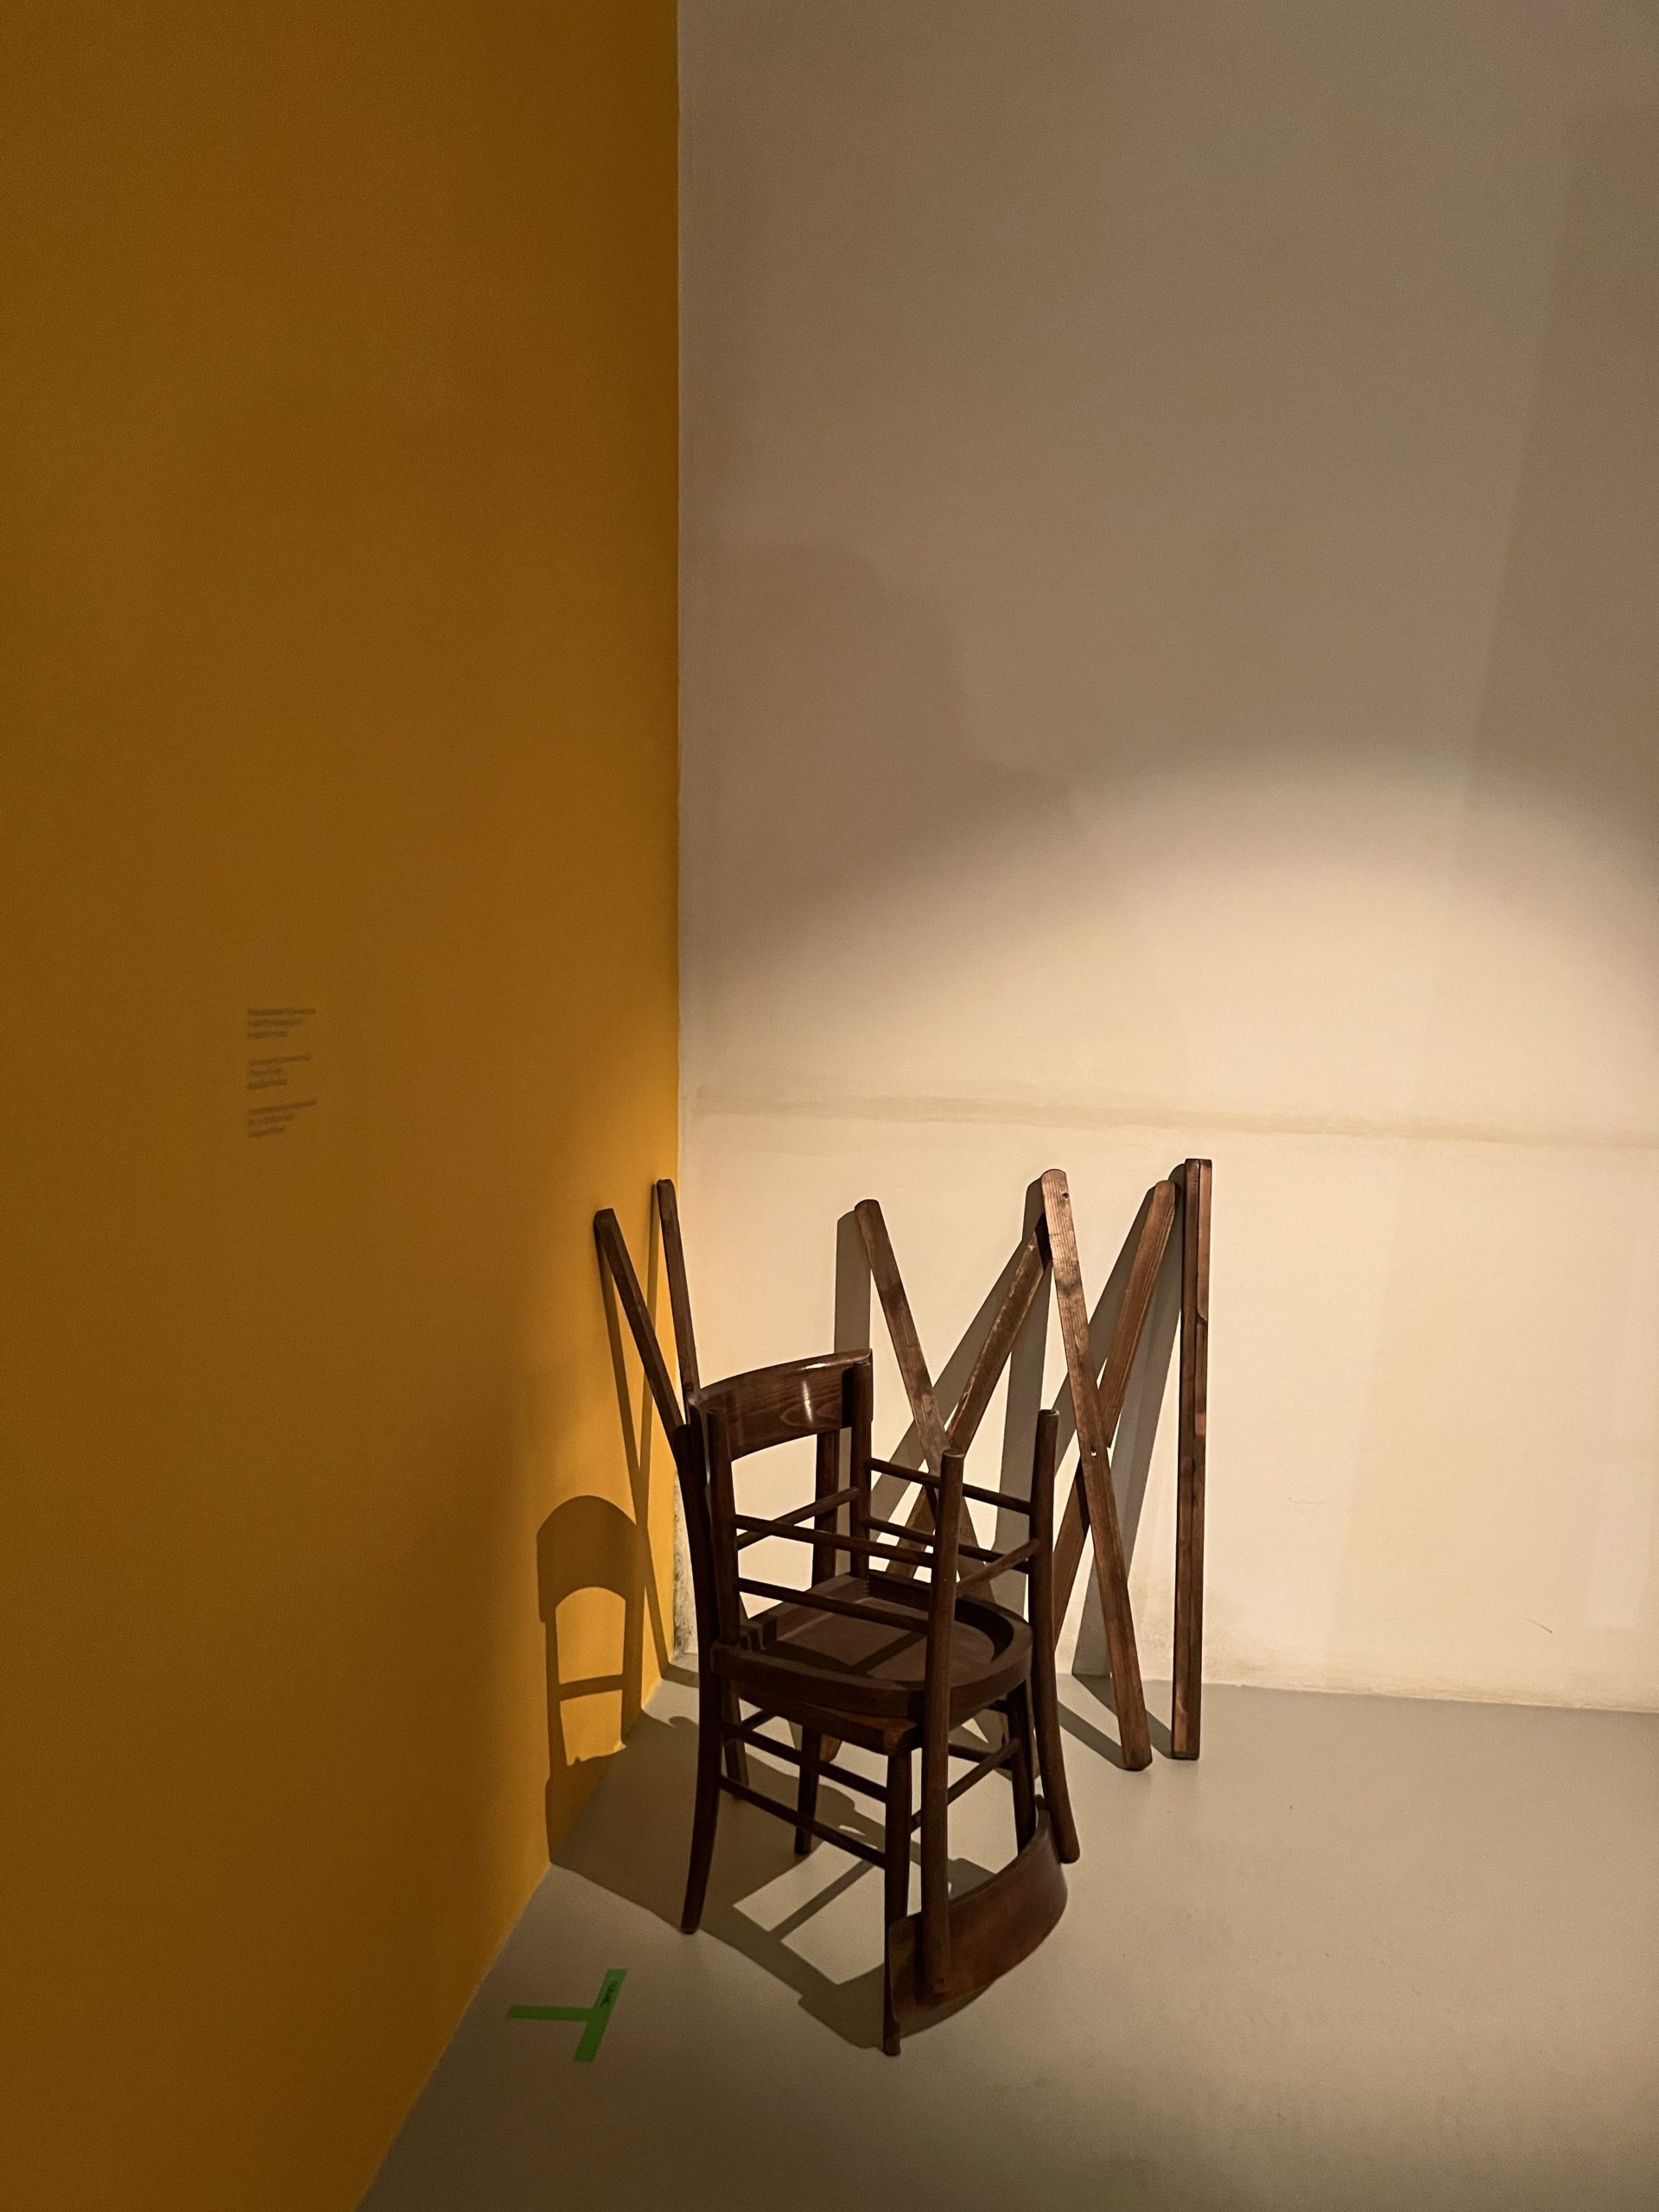 Spot lit in a corner: 2 dark wooden chairs, one stored upside down on other, and dark wood collapsible frame